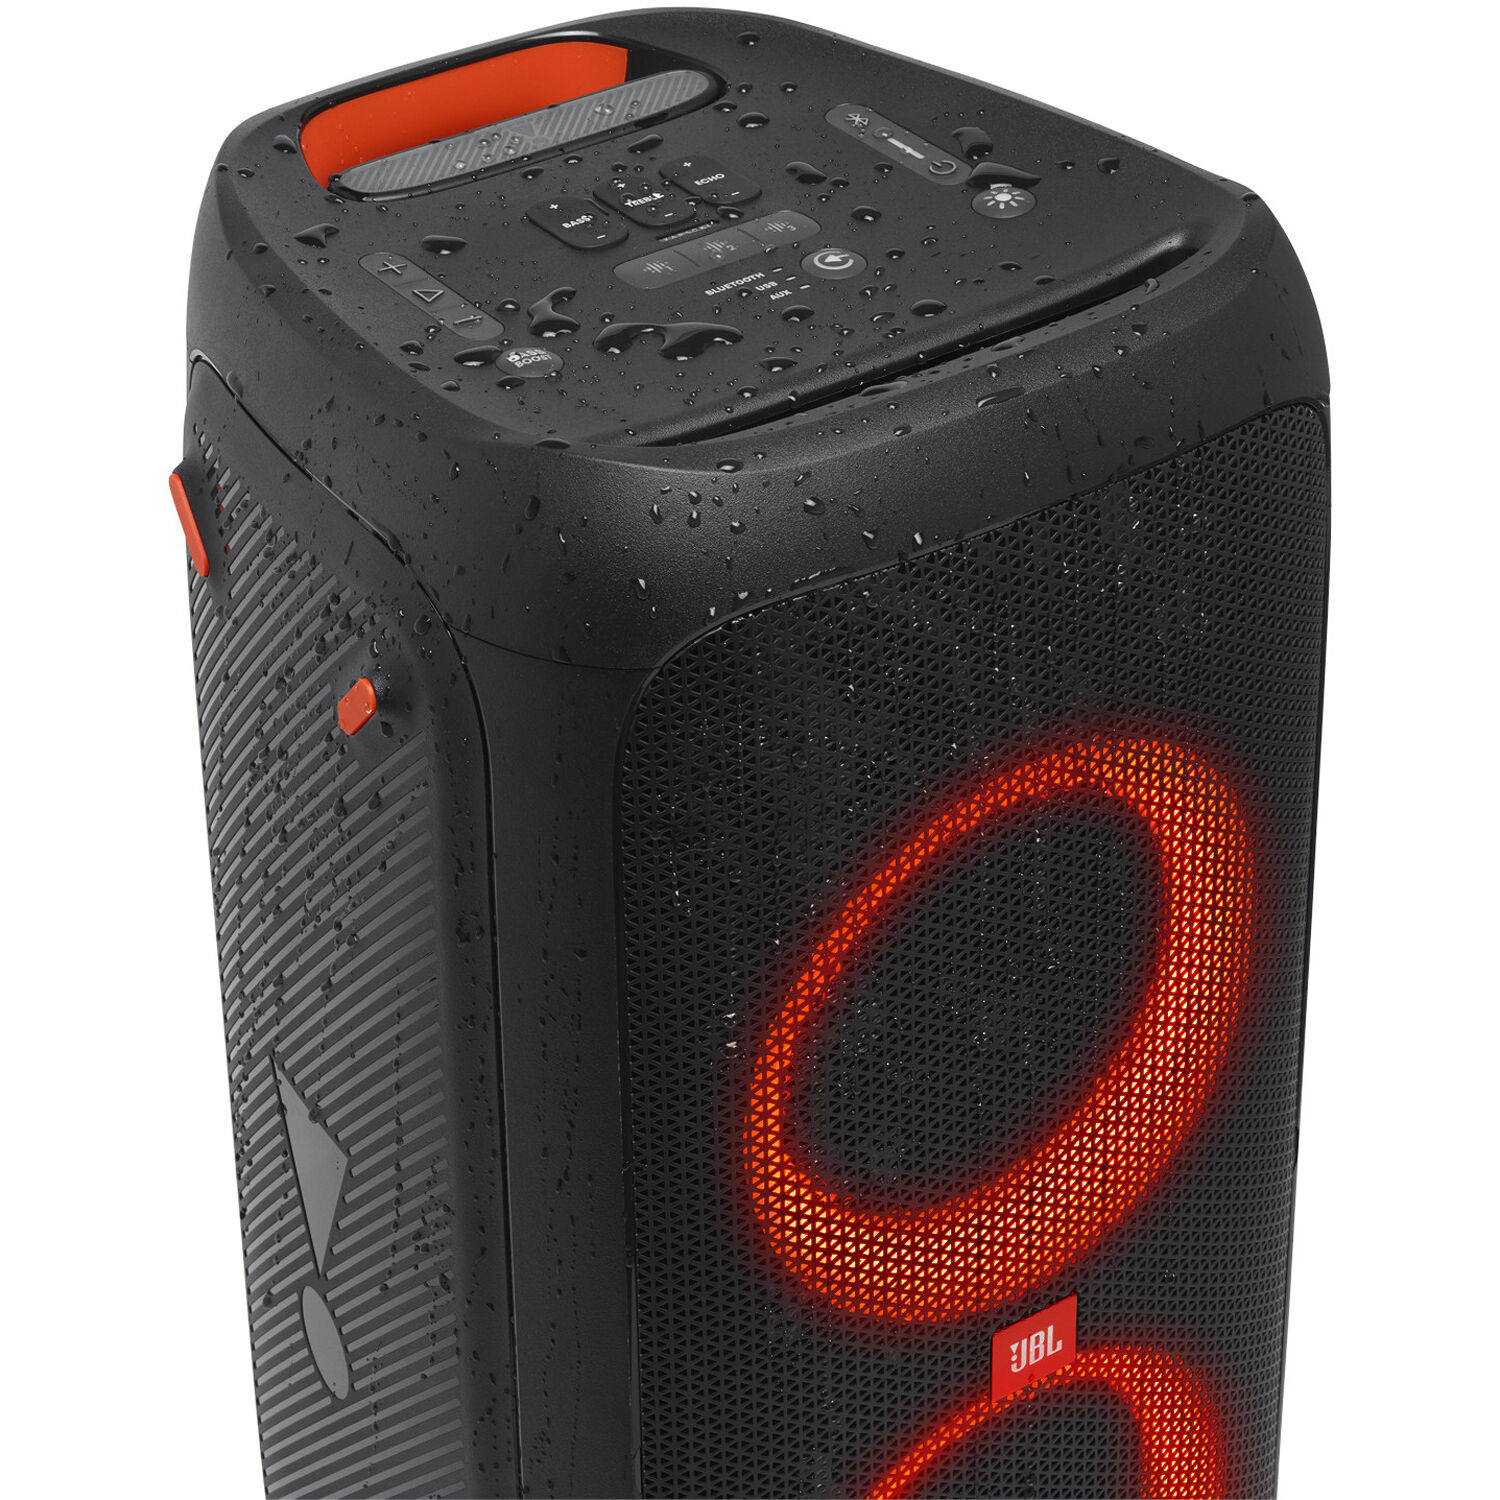 JBL Party Box 310 Portable party speaker with dazzling lights and